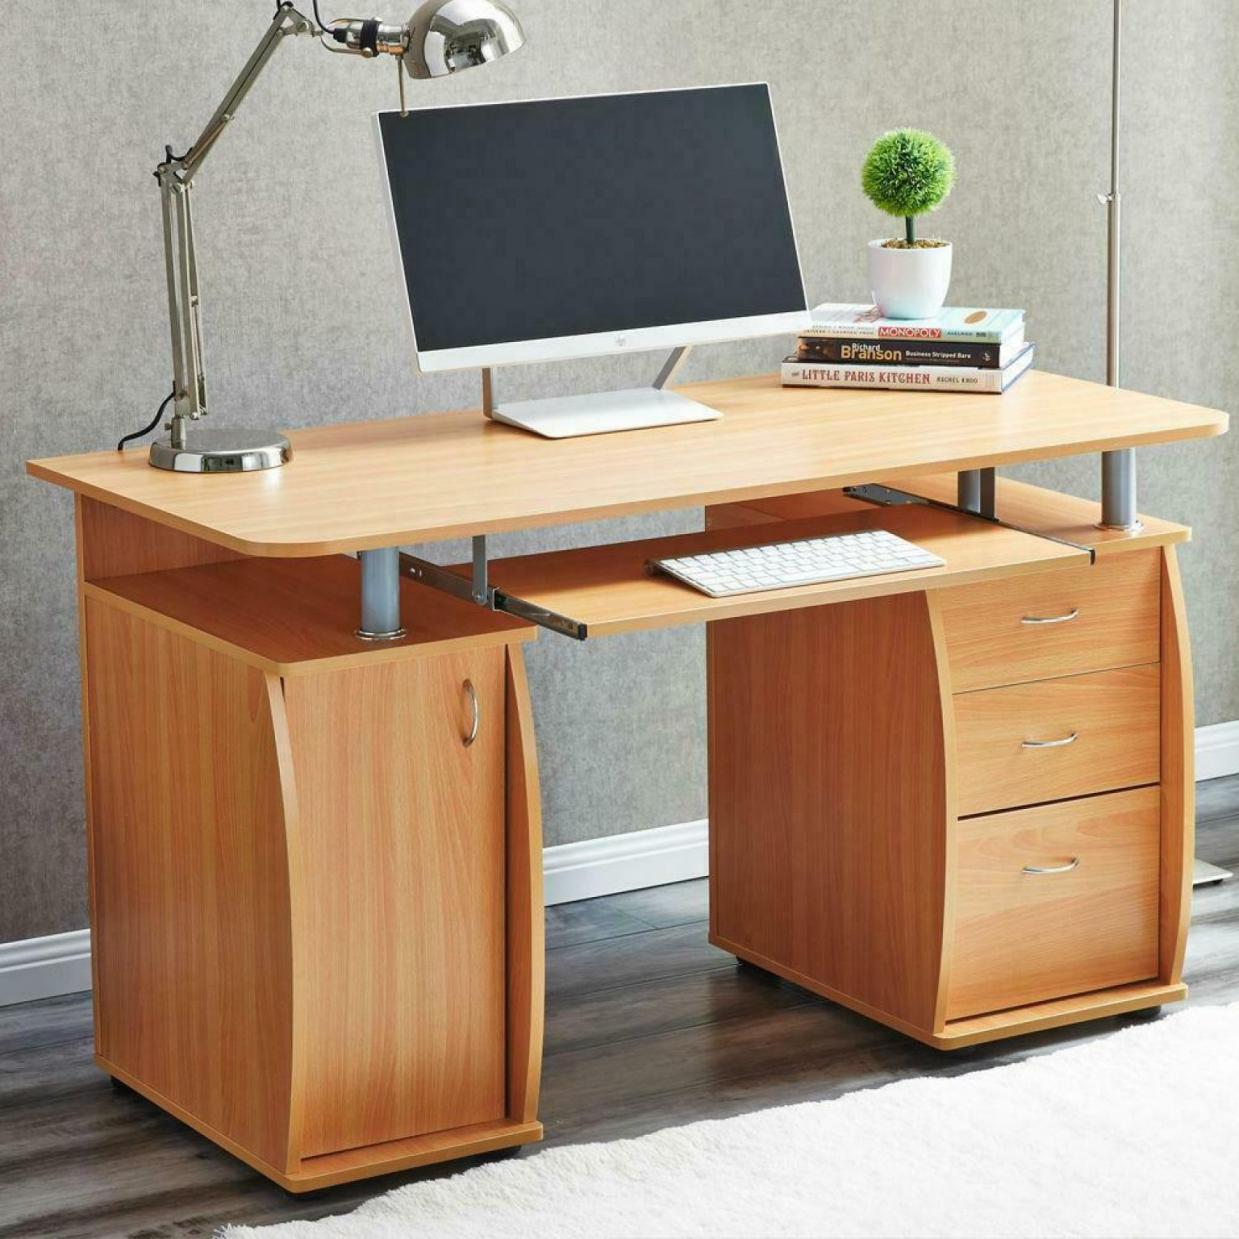 How to Choose the Right Standing Desk for My Needs?